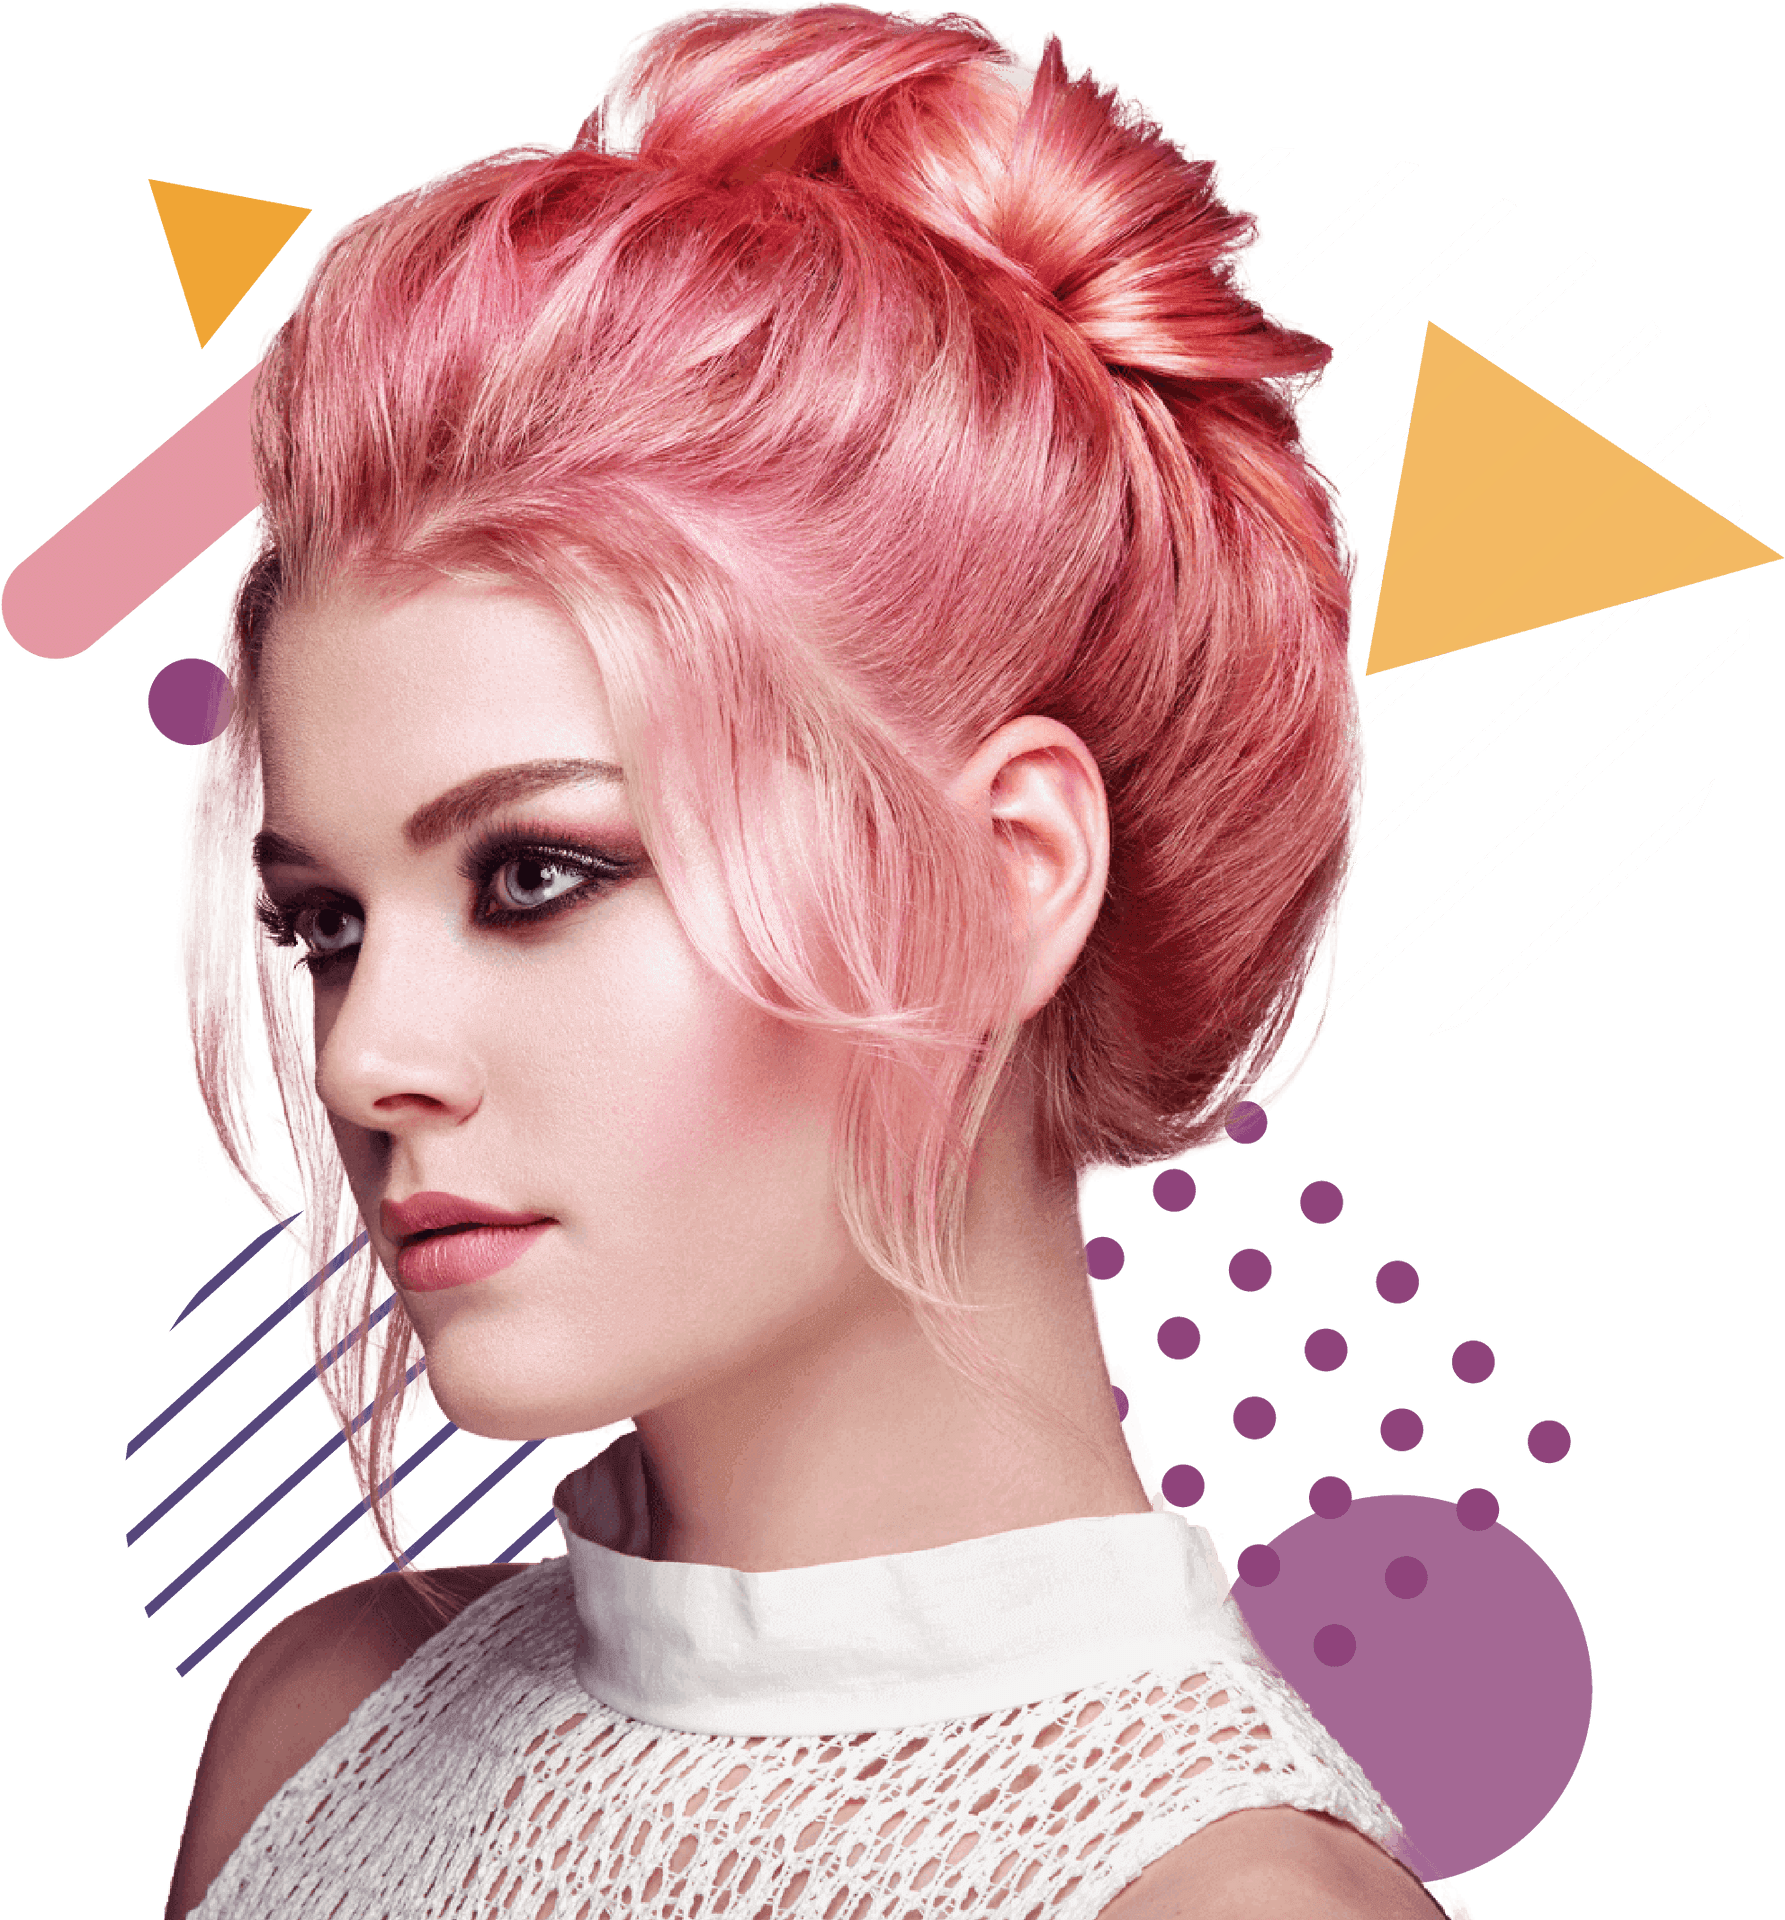 Pink Hair Updo Style Woman PNG image